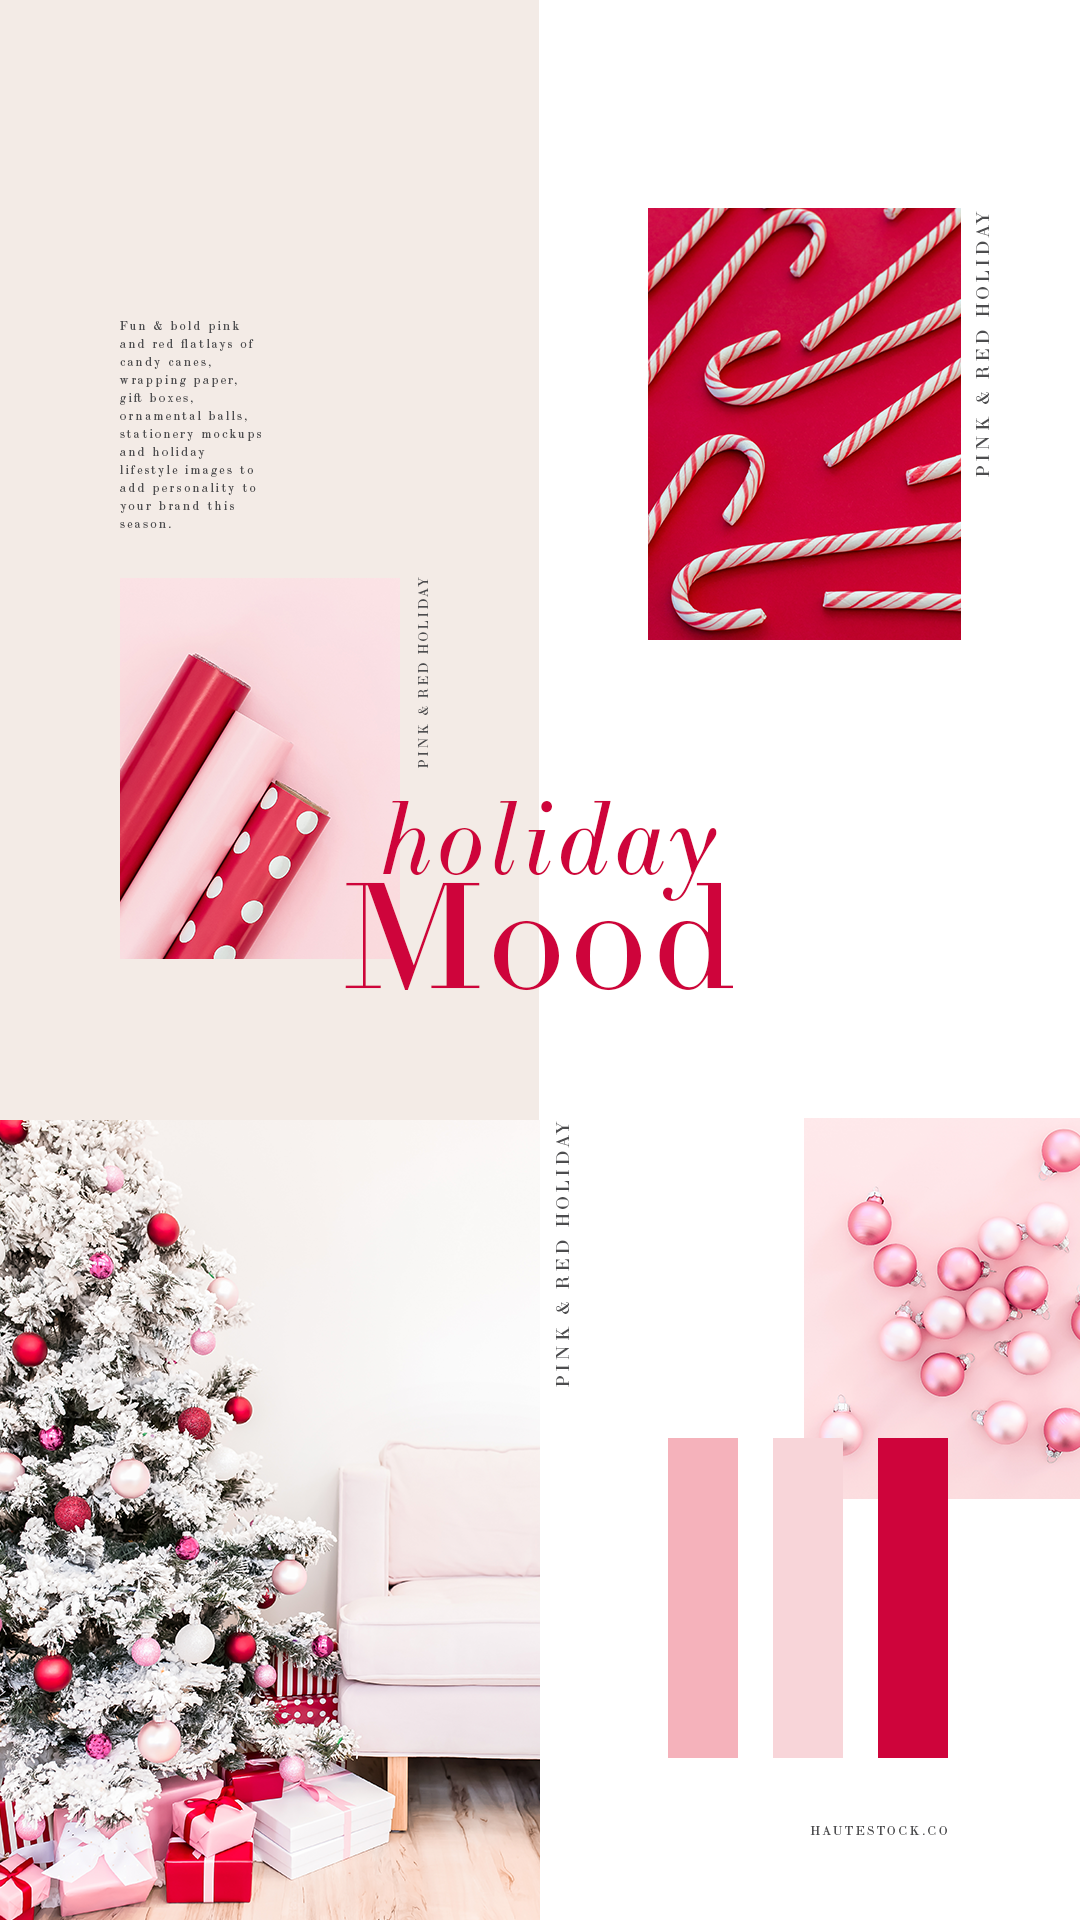 Fun & bold pink and red flatlays of candy canes, wrapping paper, gift boxes, ornamental balls, stationery mockups and holiday lifestyle images to add personality to your brand this season.